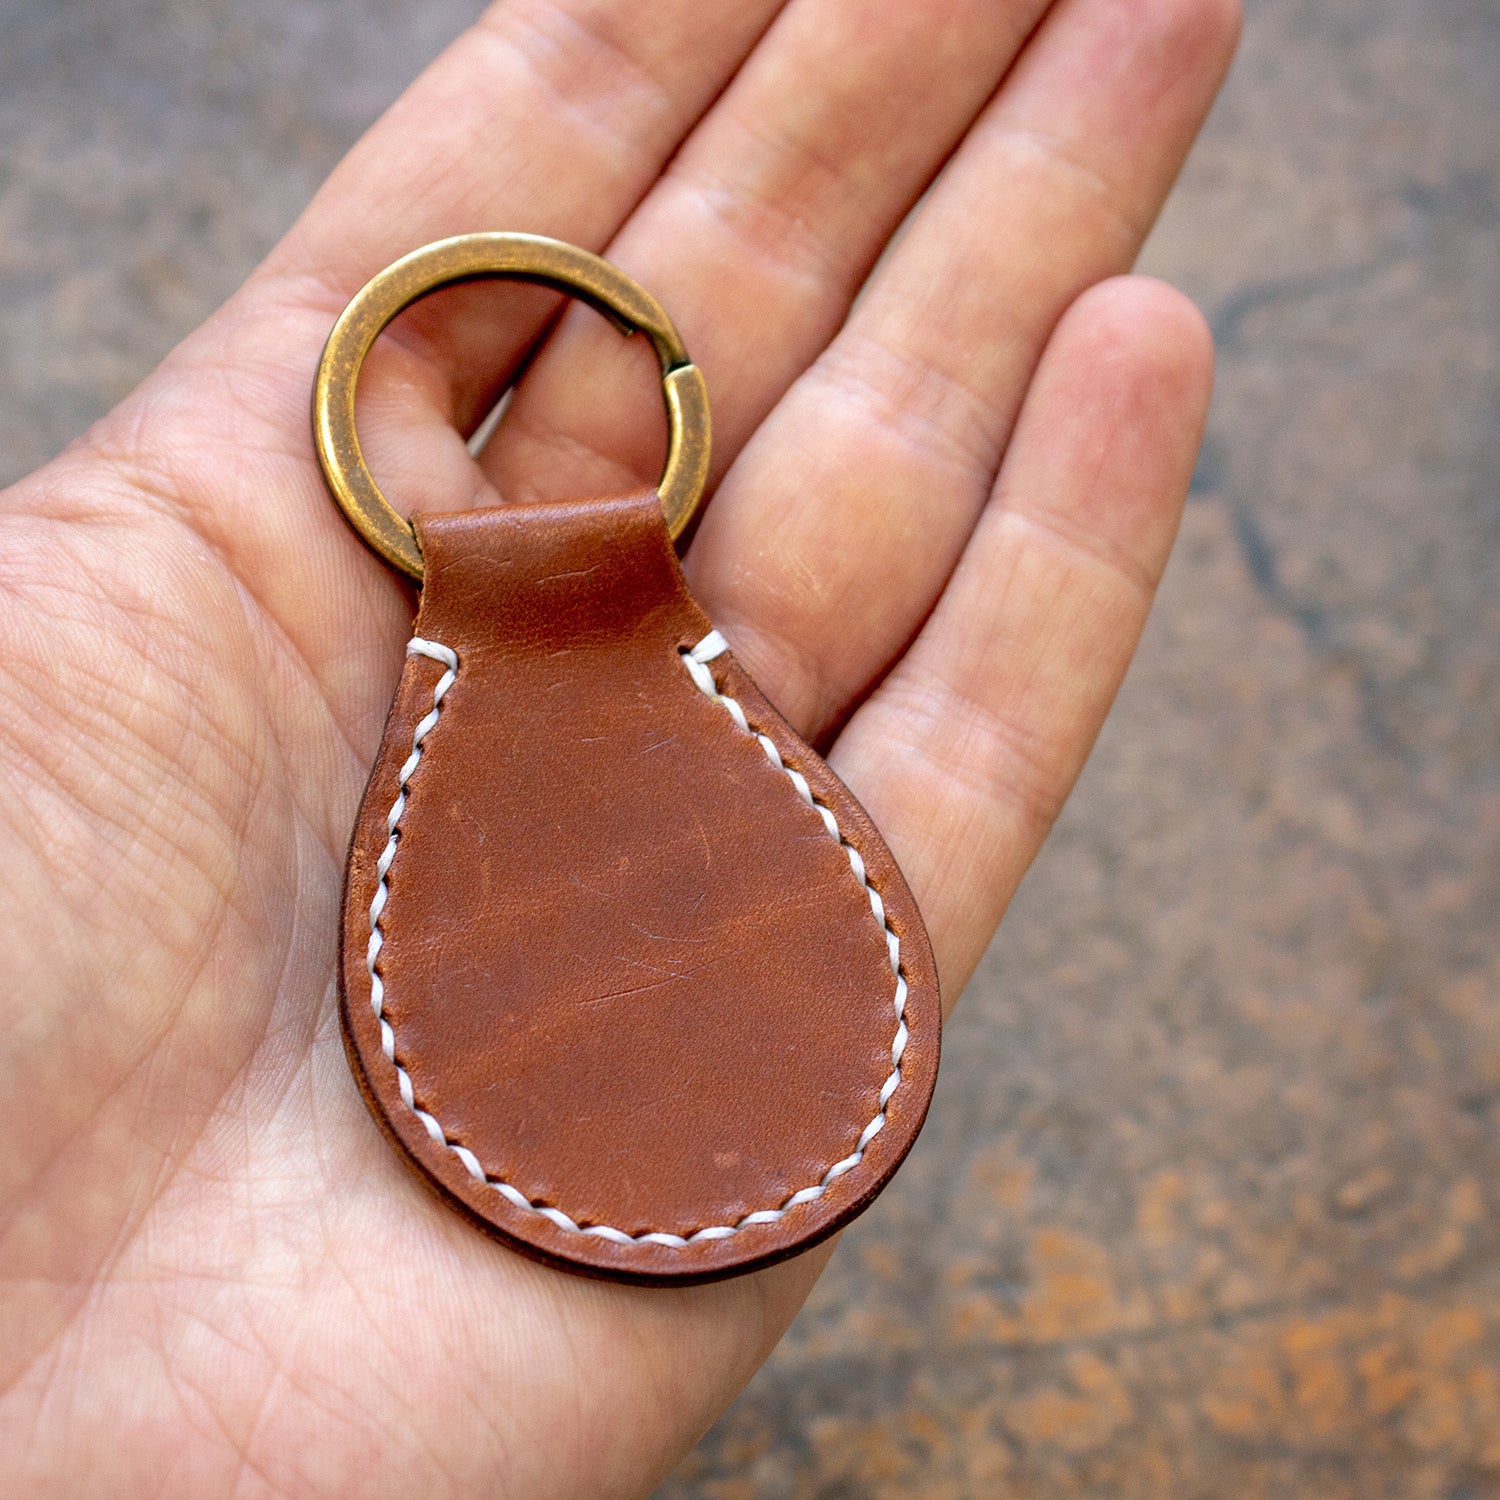 Full Grain leather Key Chain Engraving ready | 10 Packs Blank Leather  Keyrings | Choose one color or Mixed | Laser Engraving, Hot and Foil  Stamping